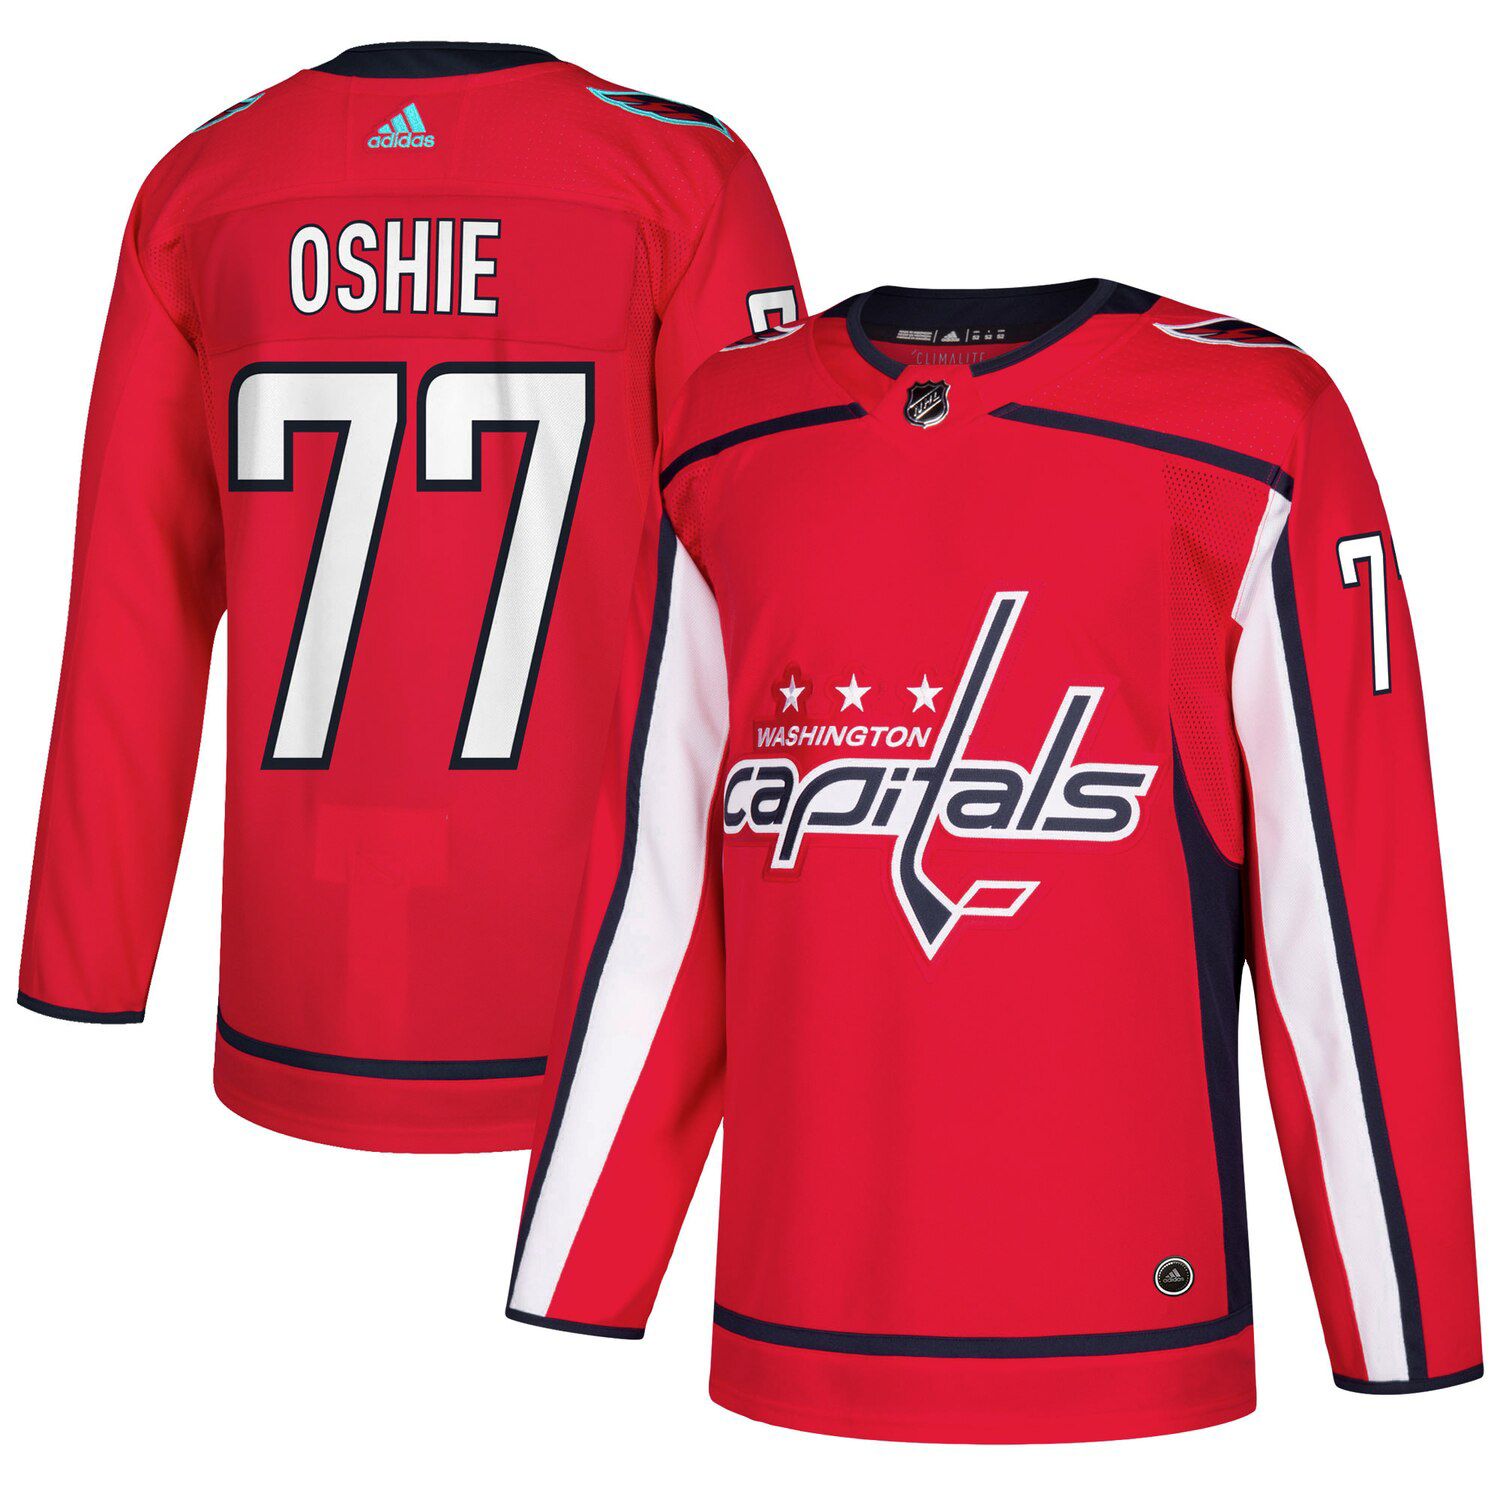 tj oshie authentic jersey